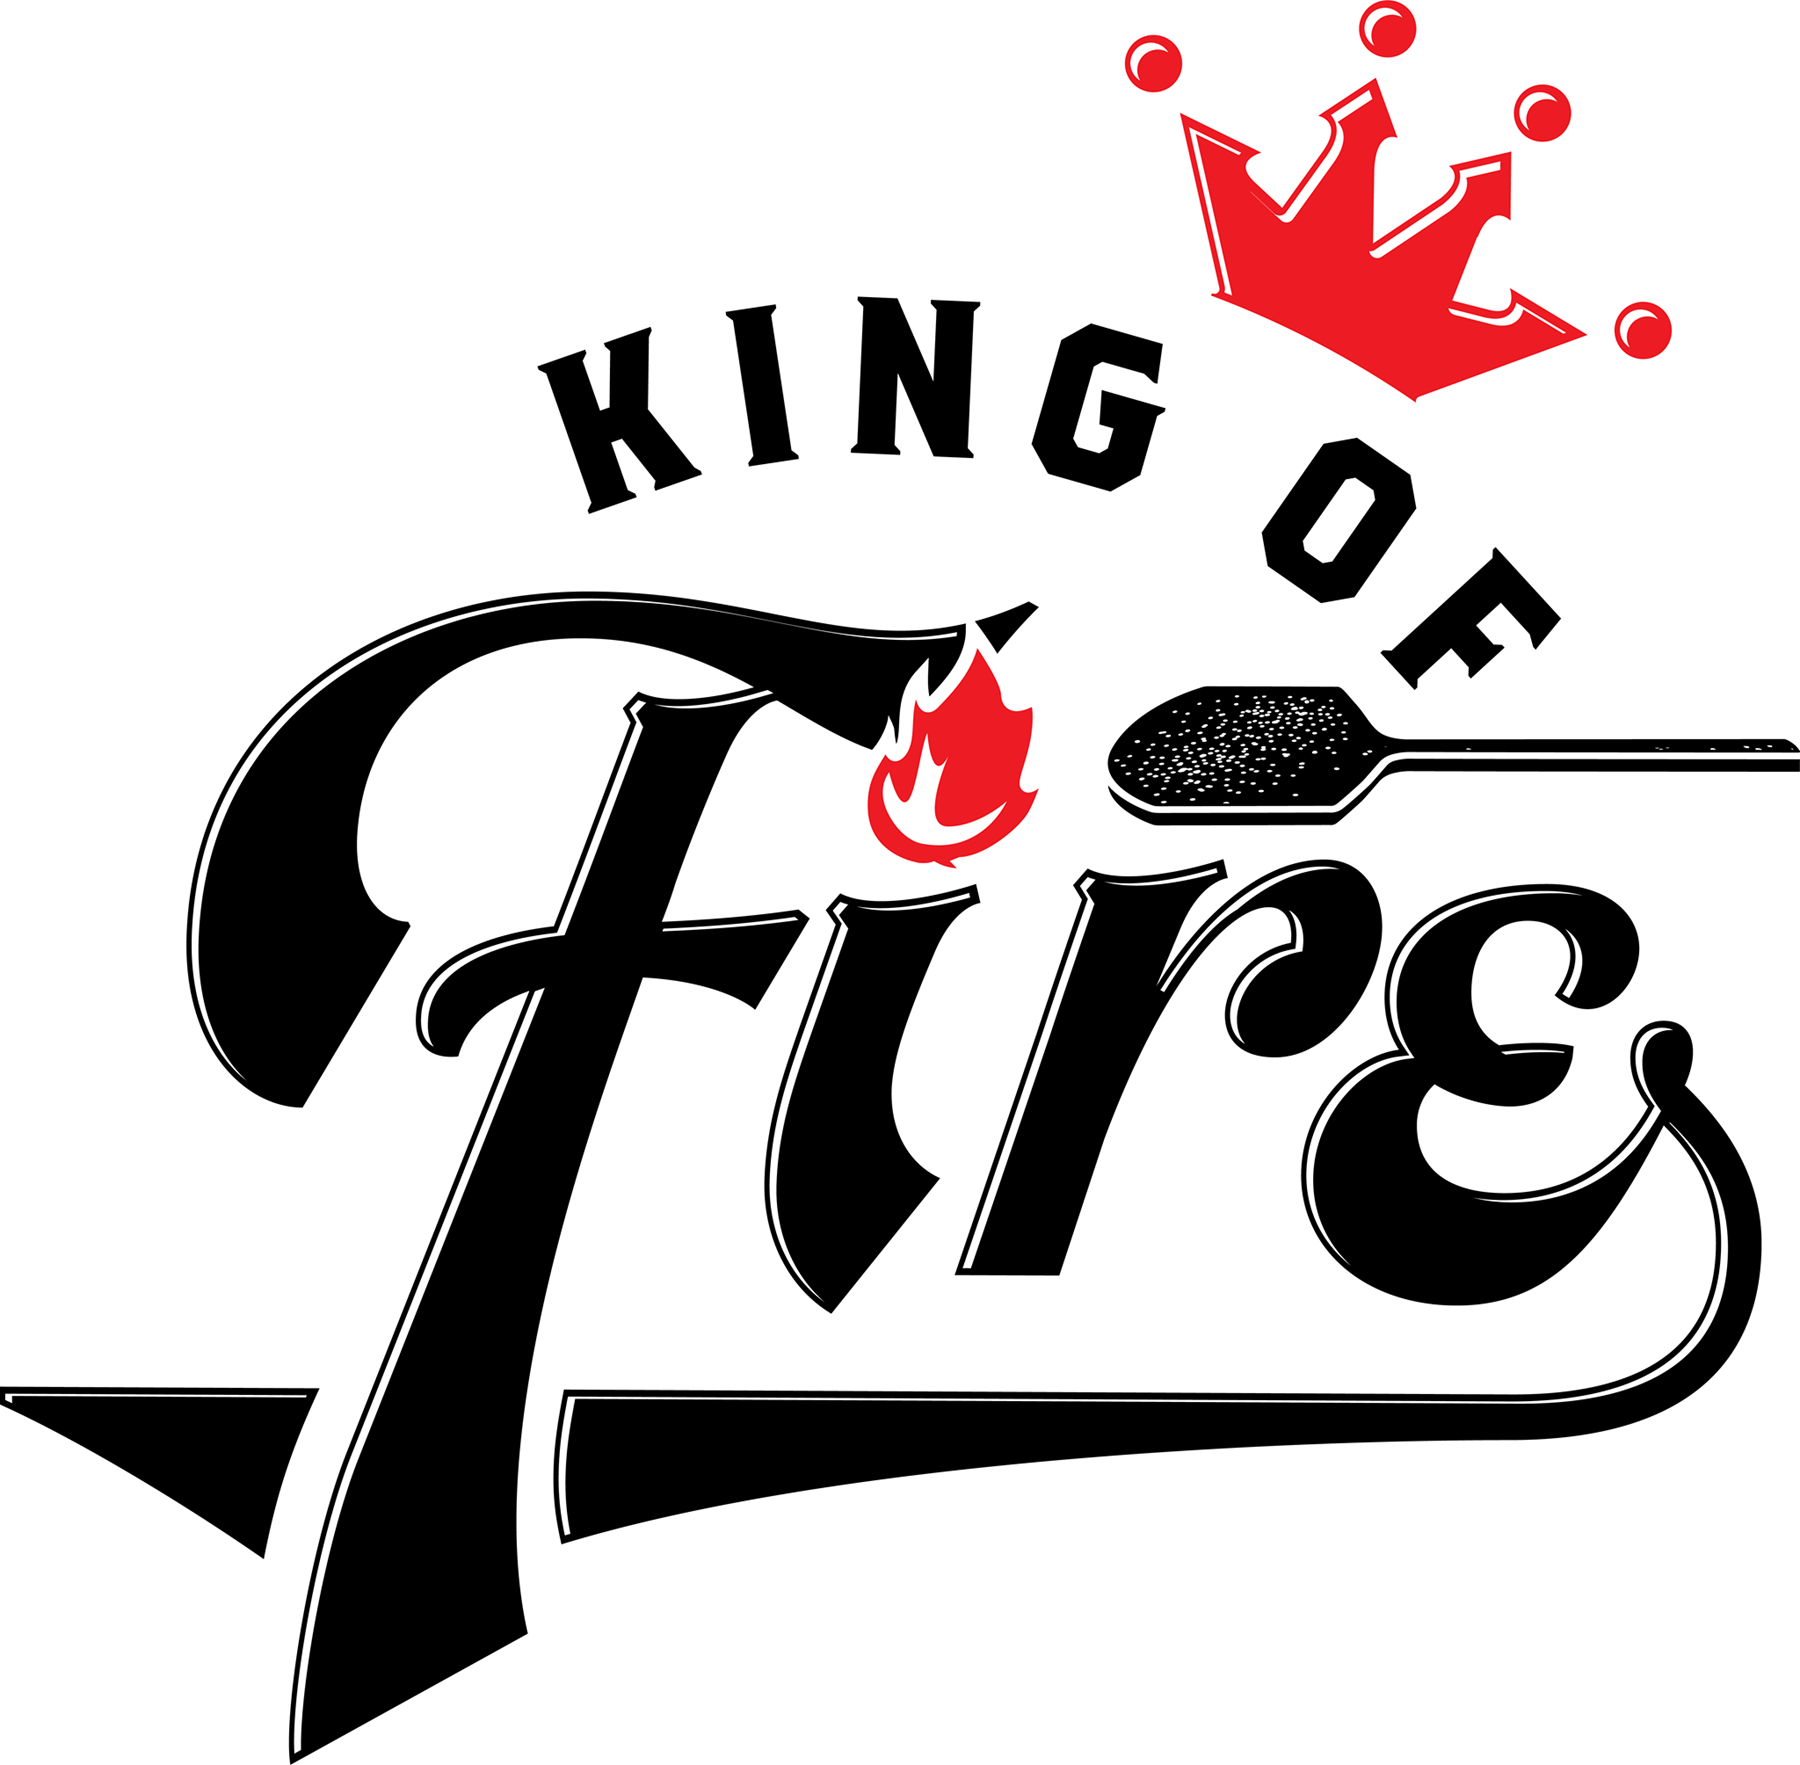 King of Fire Pizza